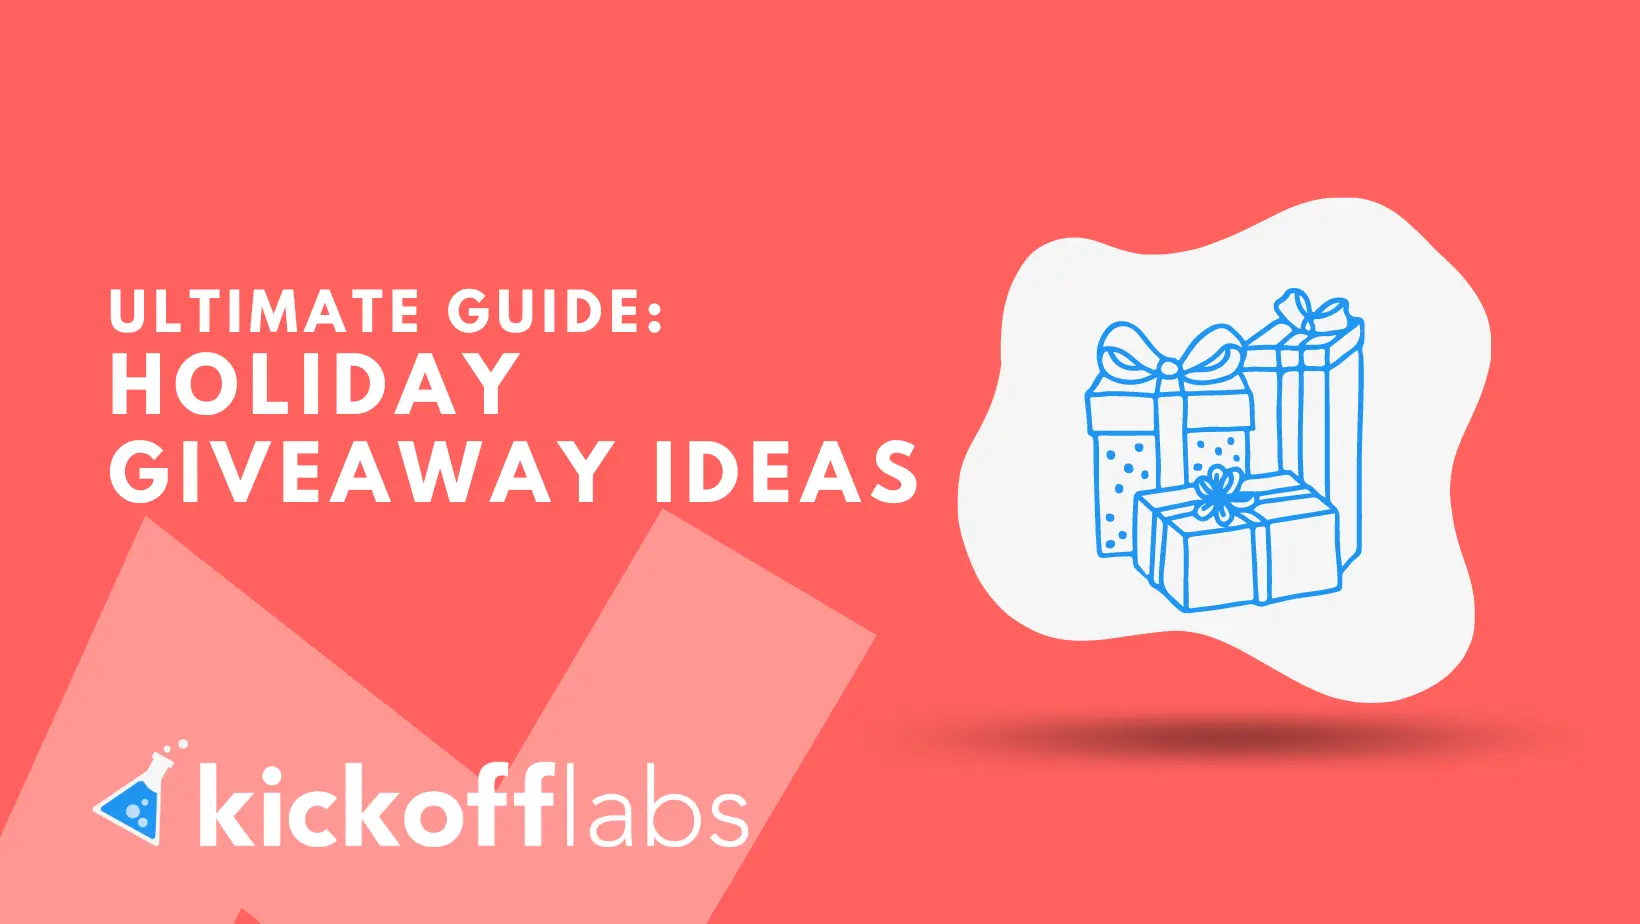 Holiday Giveaway Ideas - Ultimate Guide